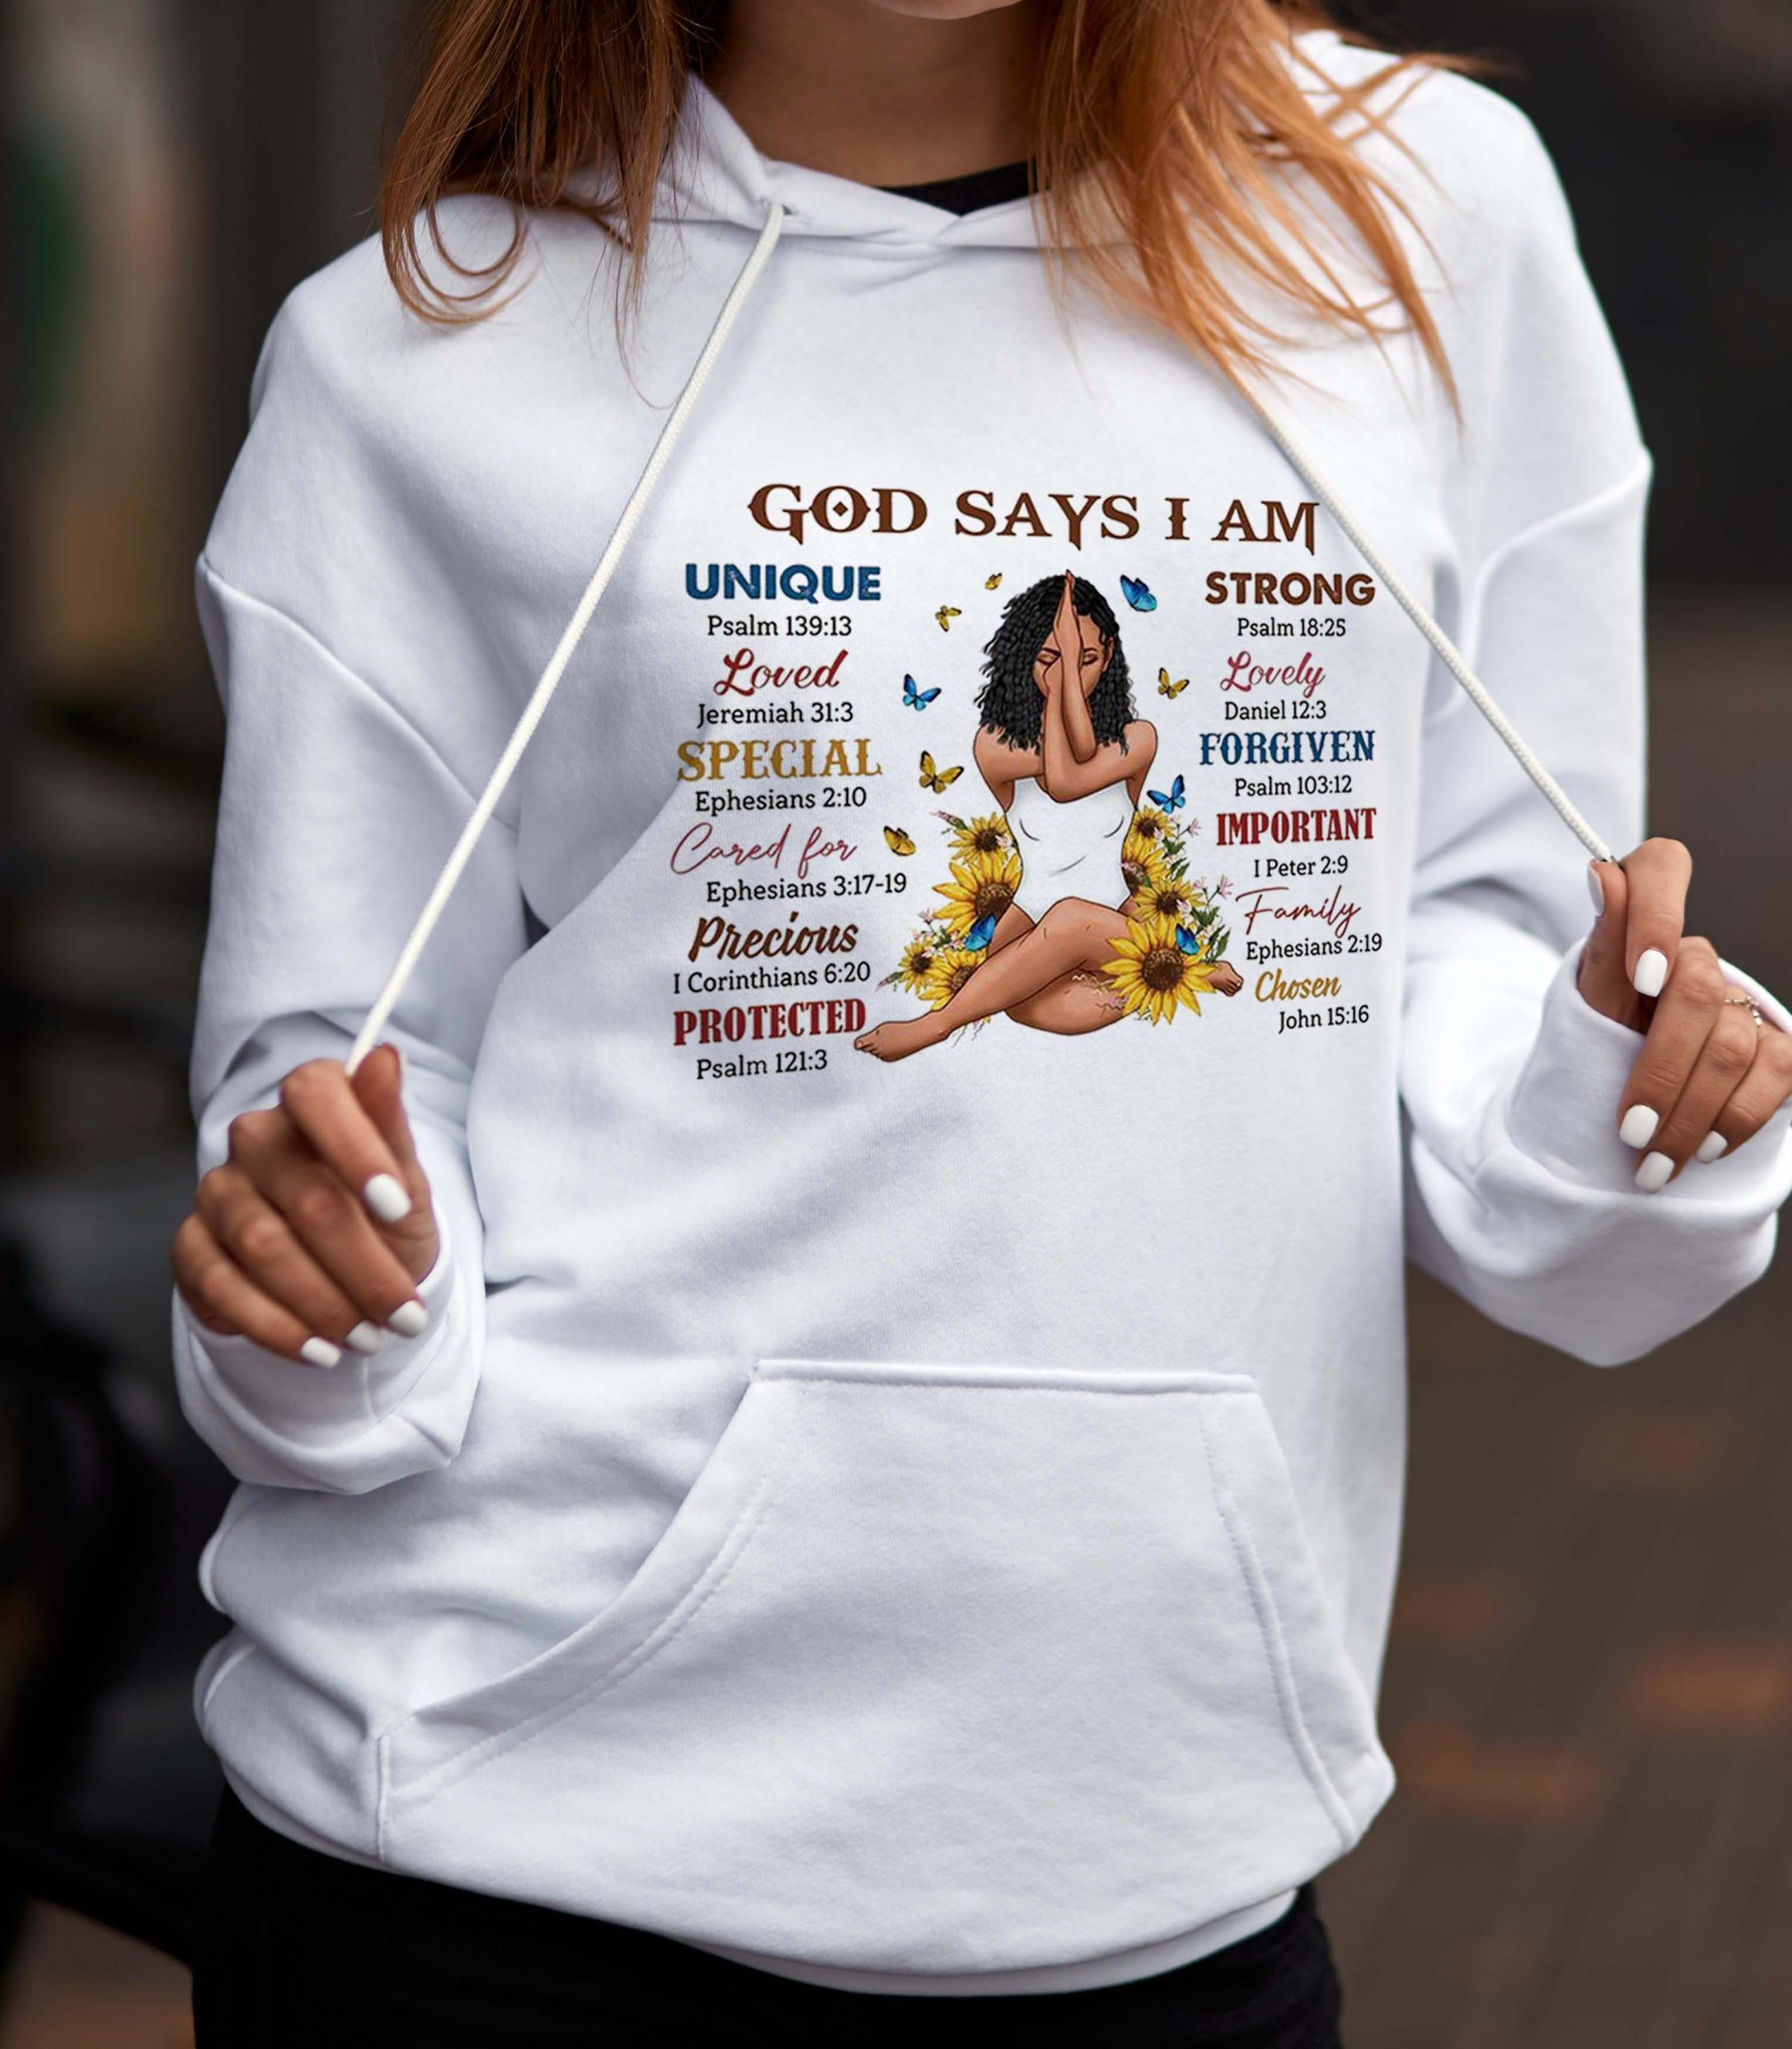 young girl wears white hoodie